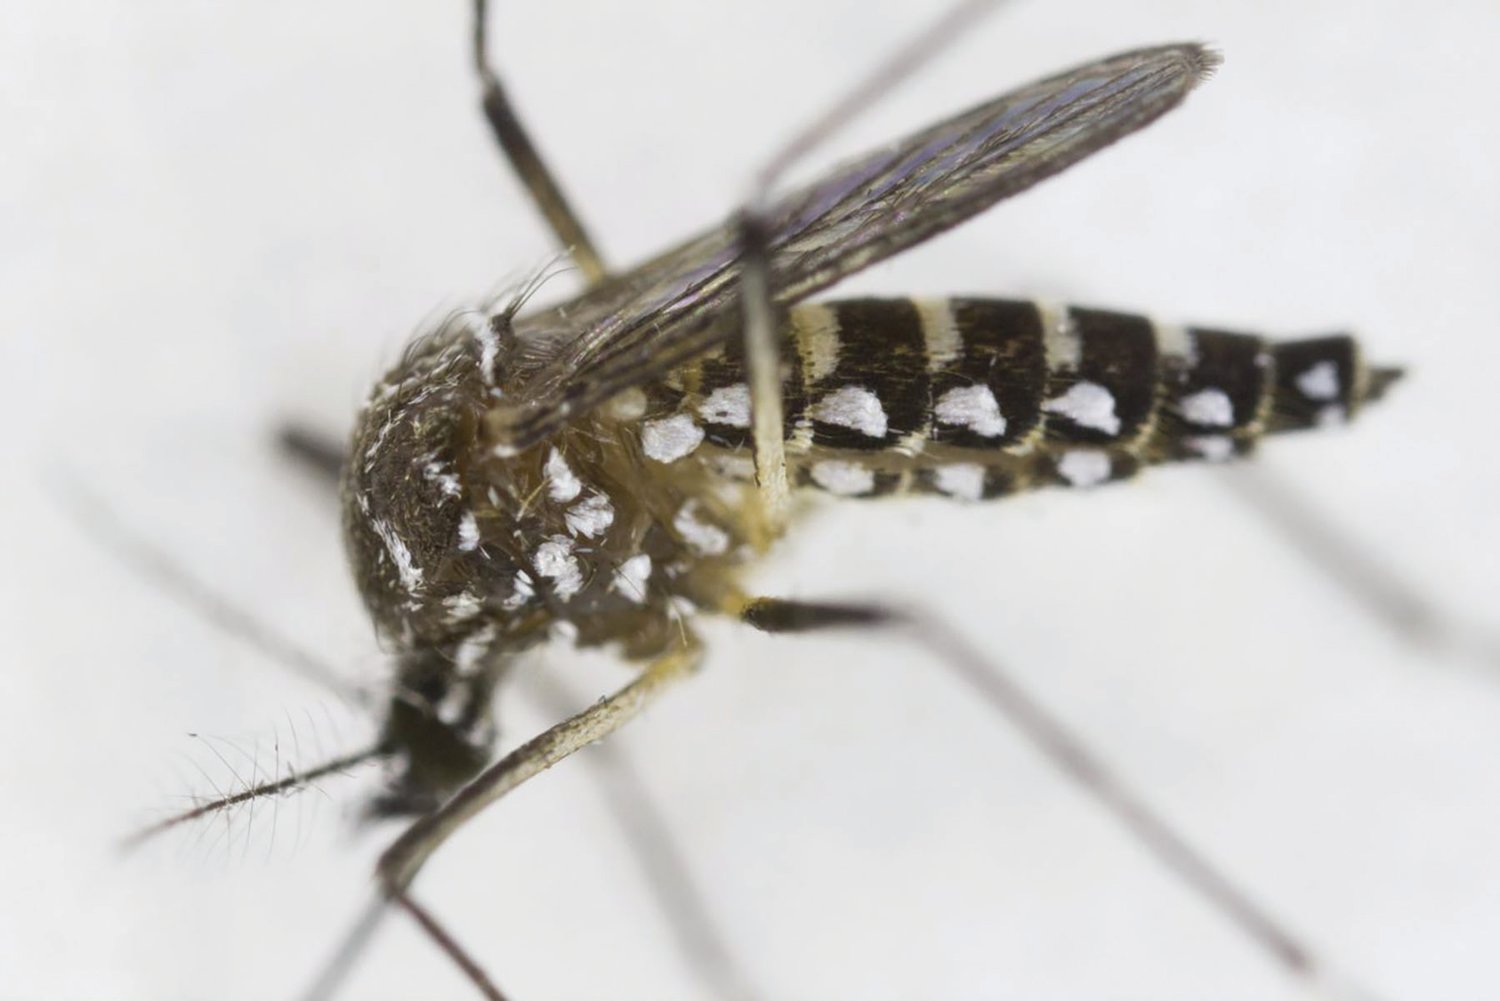 Researchers compared how mosquitoes collected during different parts of the year responded to changes in temperature.